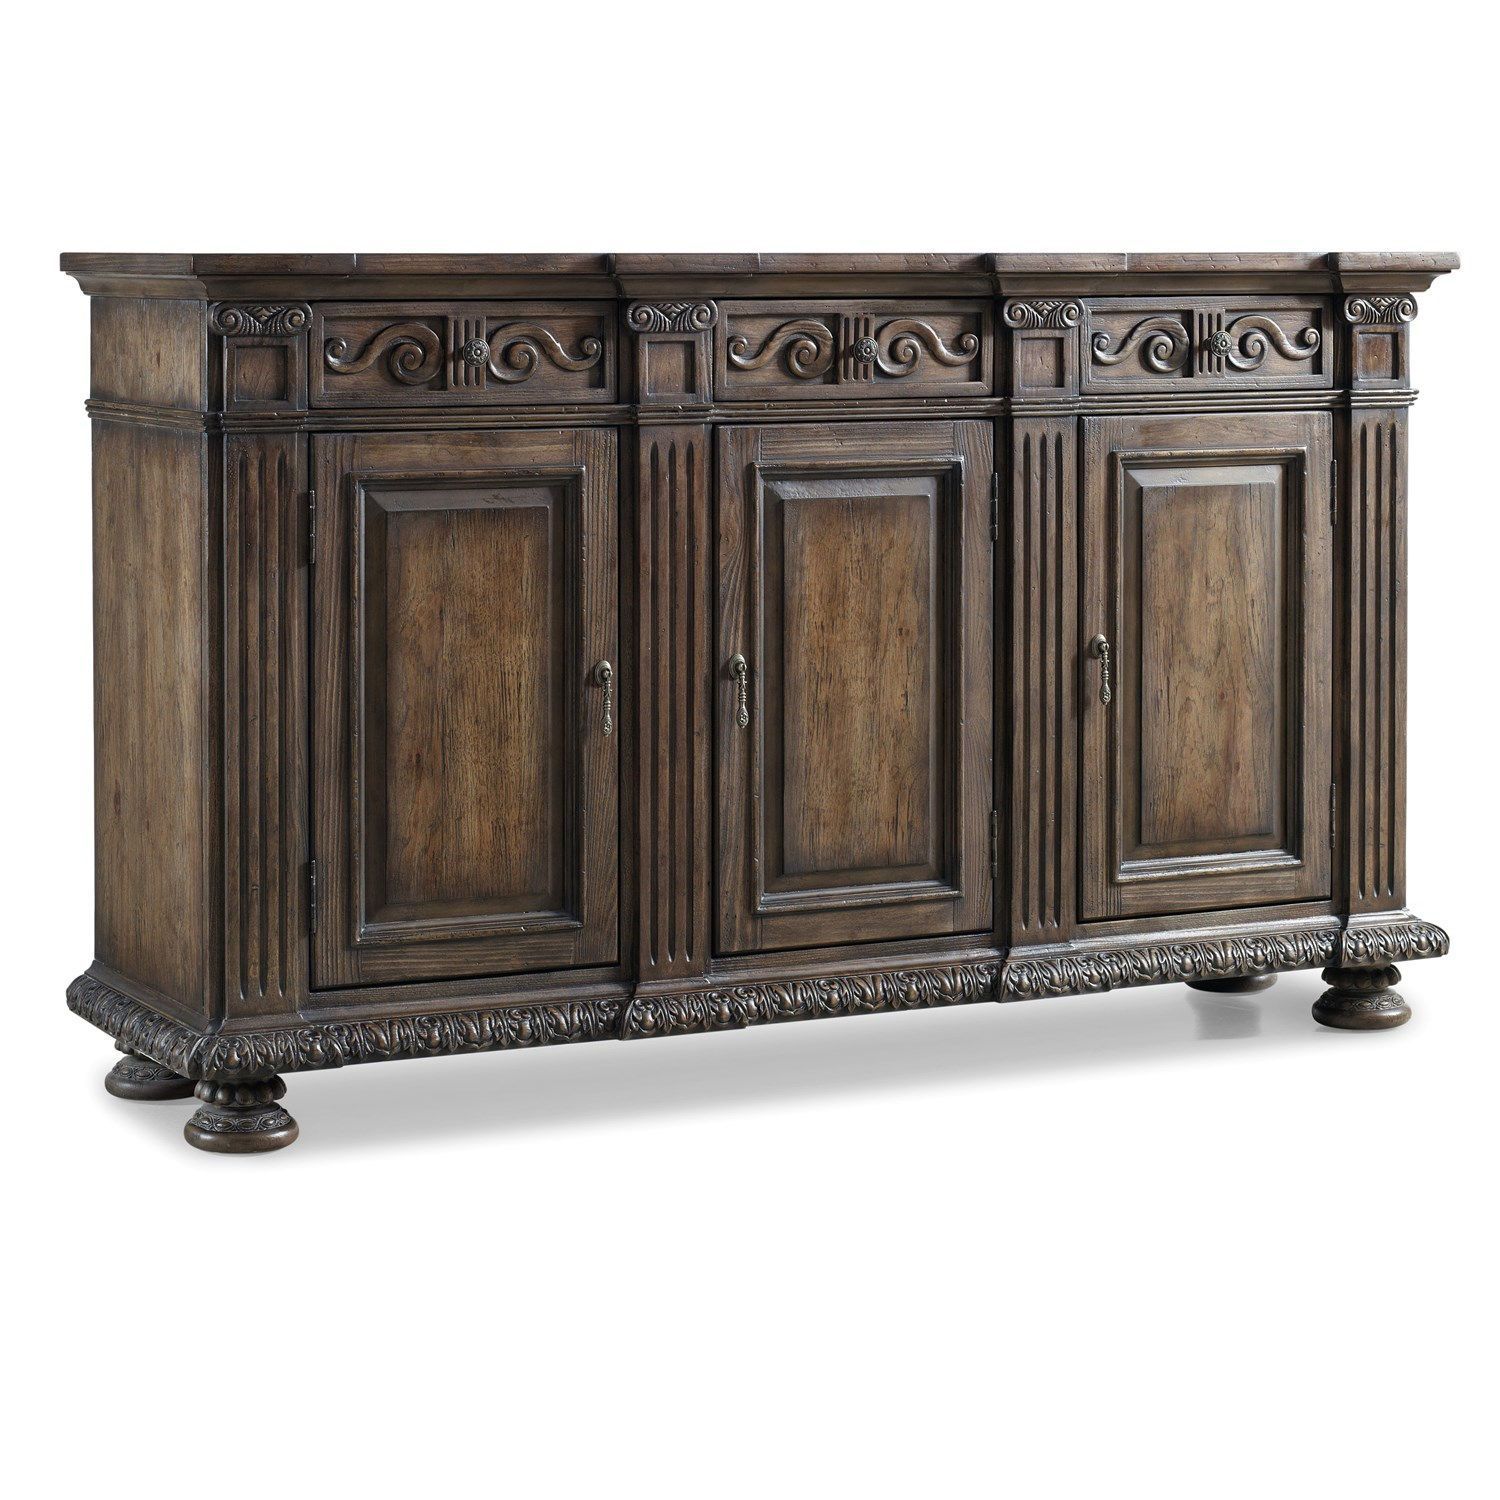 Hooker Furniture 5070 85001 Rhapsody 72" Credenza | Hooker With Best And Newest Chalus Sideboards (View 15 of 20)